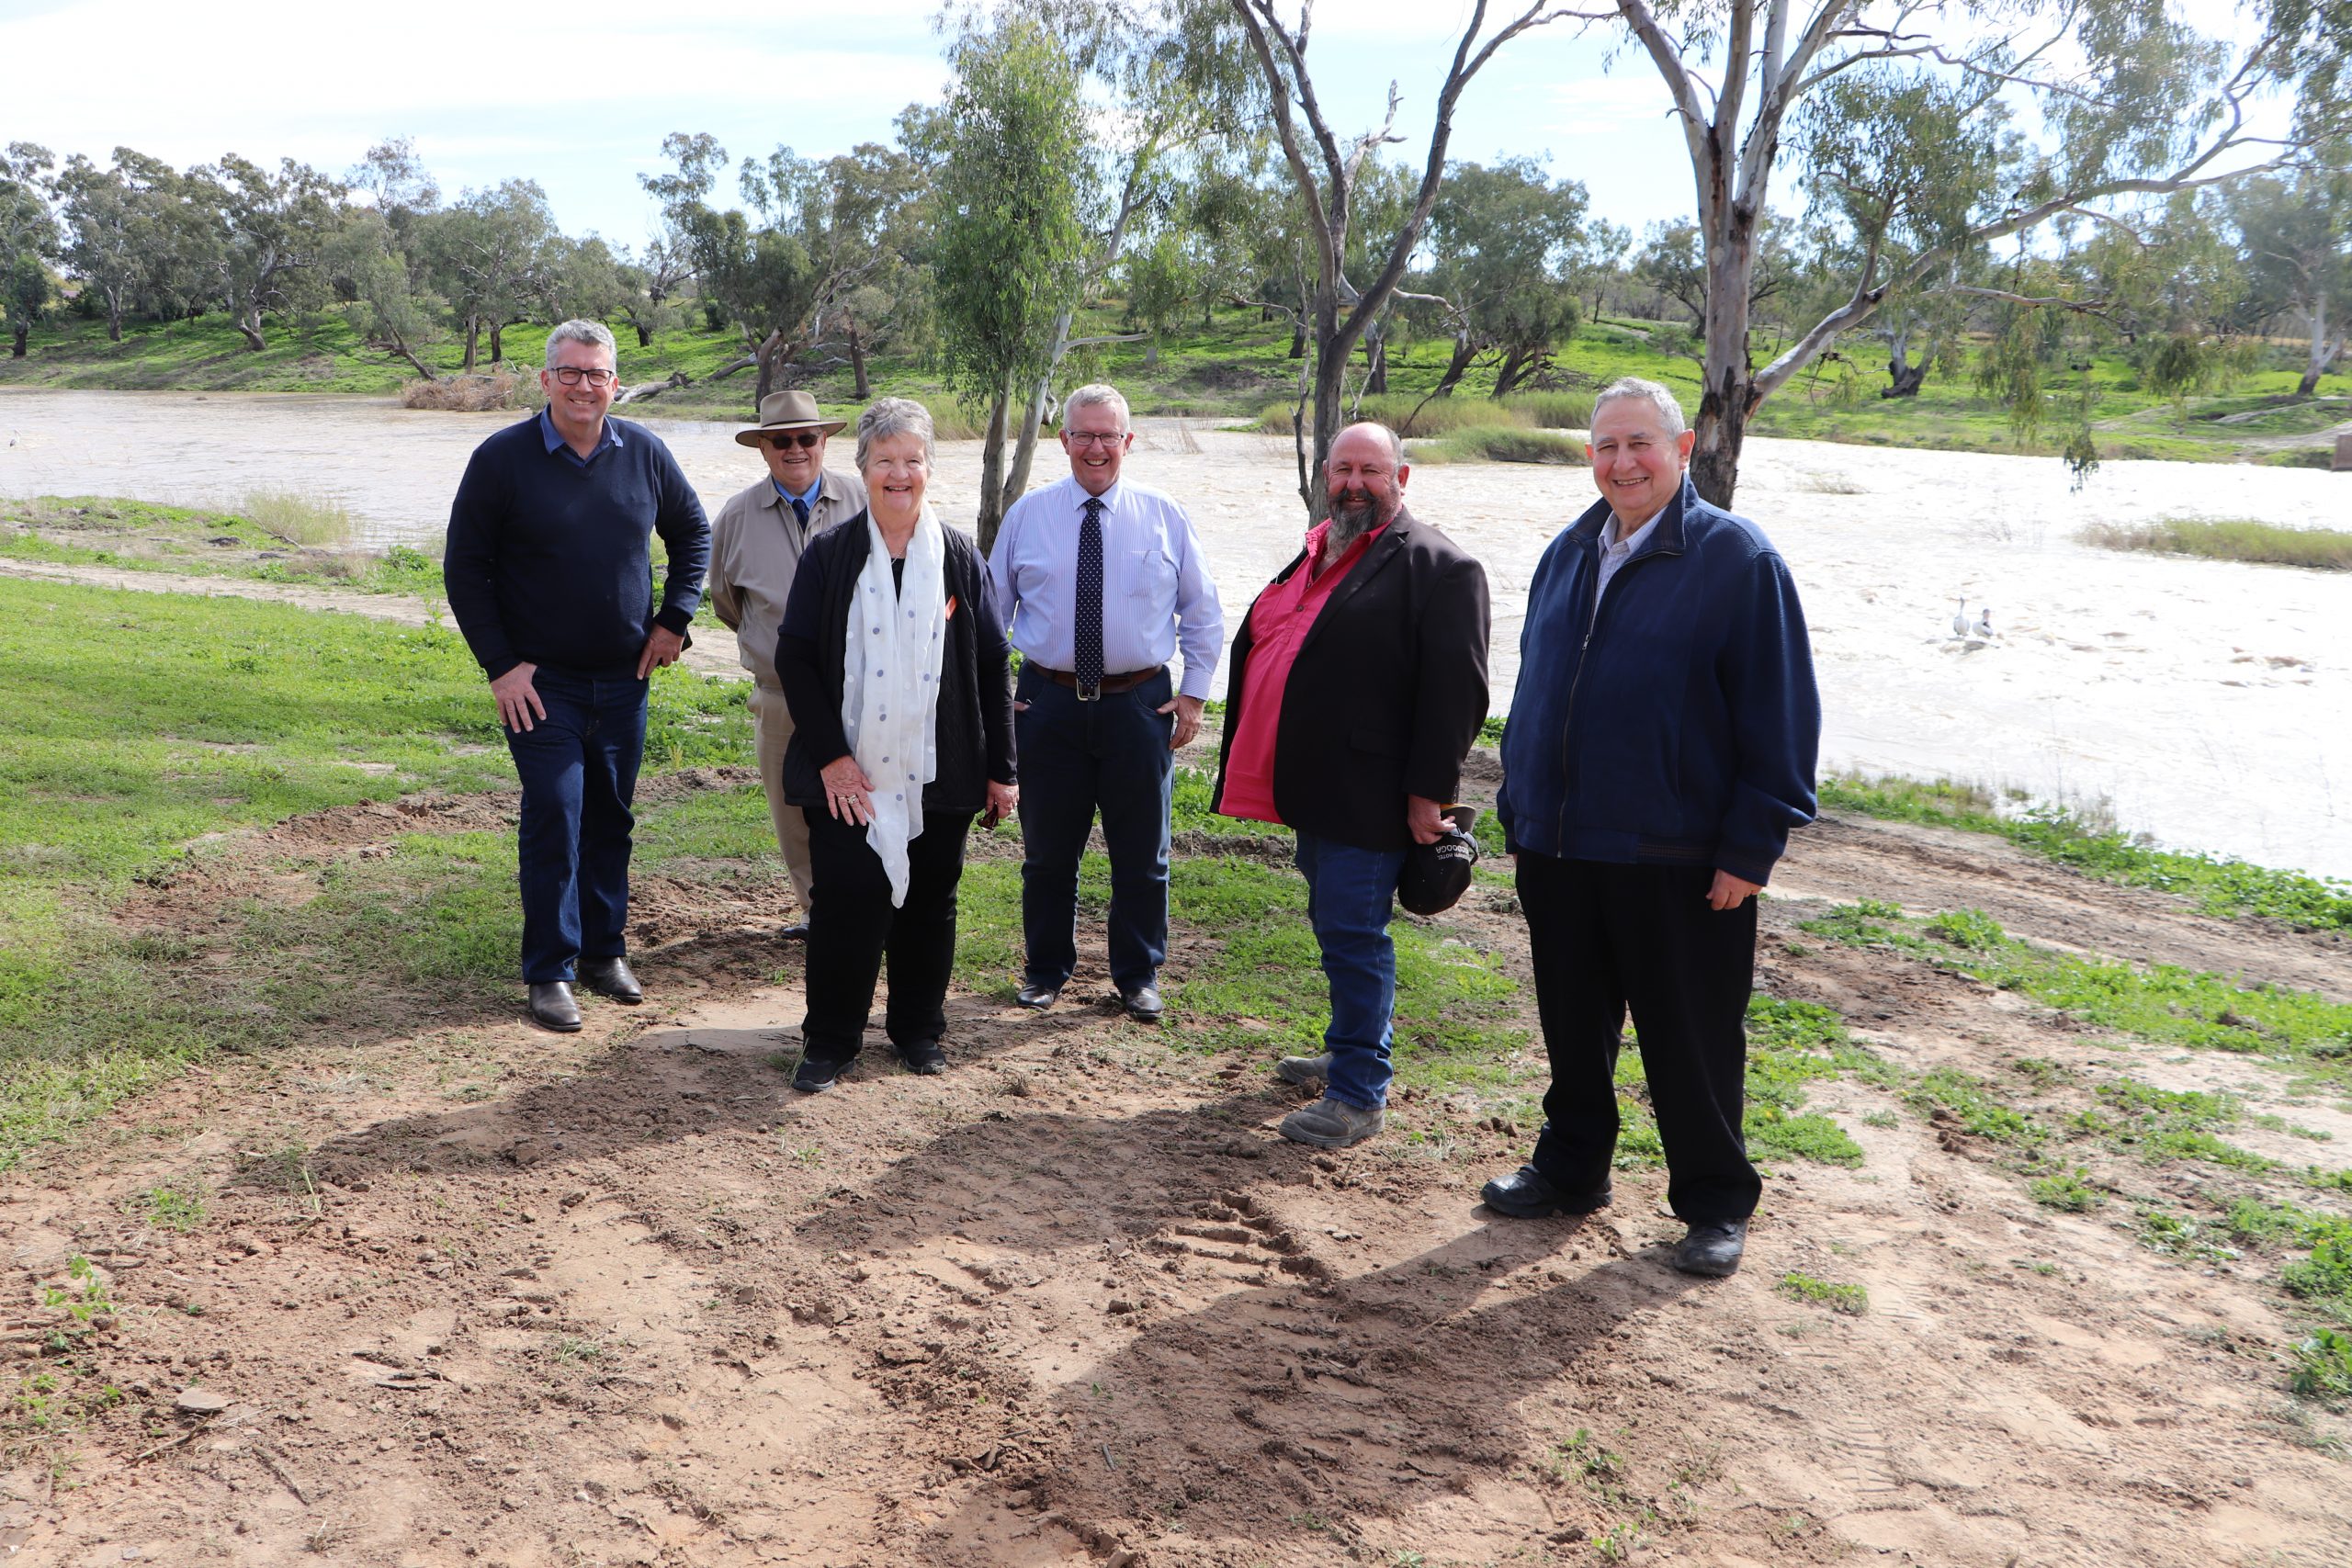 Fish Traps lookout and river walk to boost tourism in Brewarrina